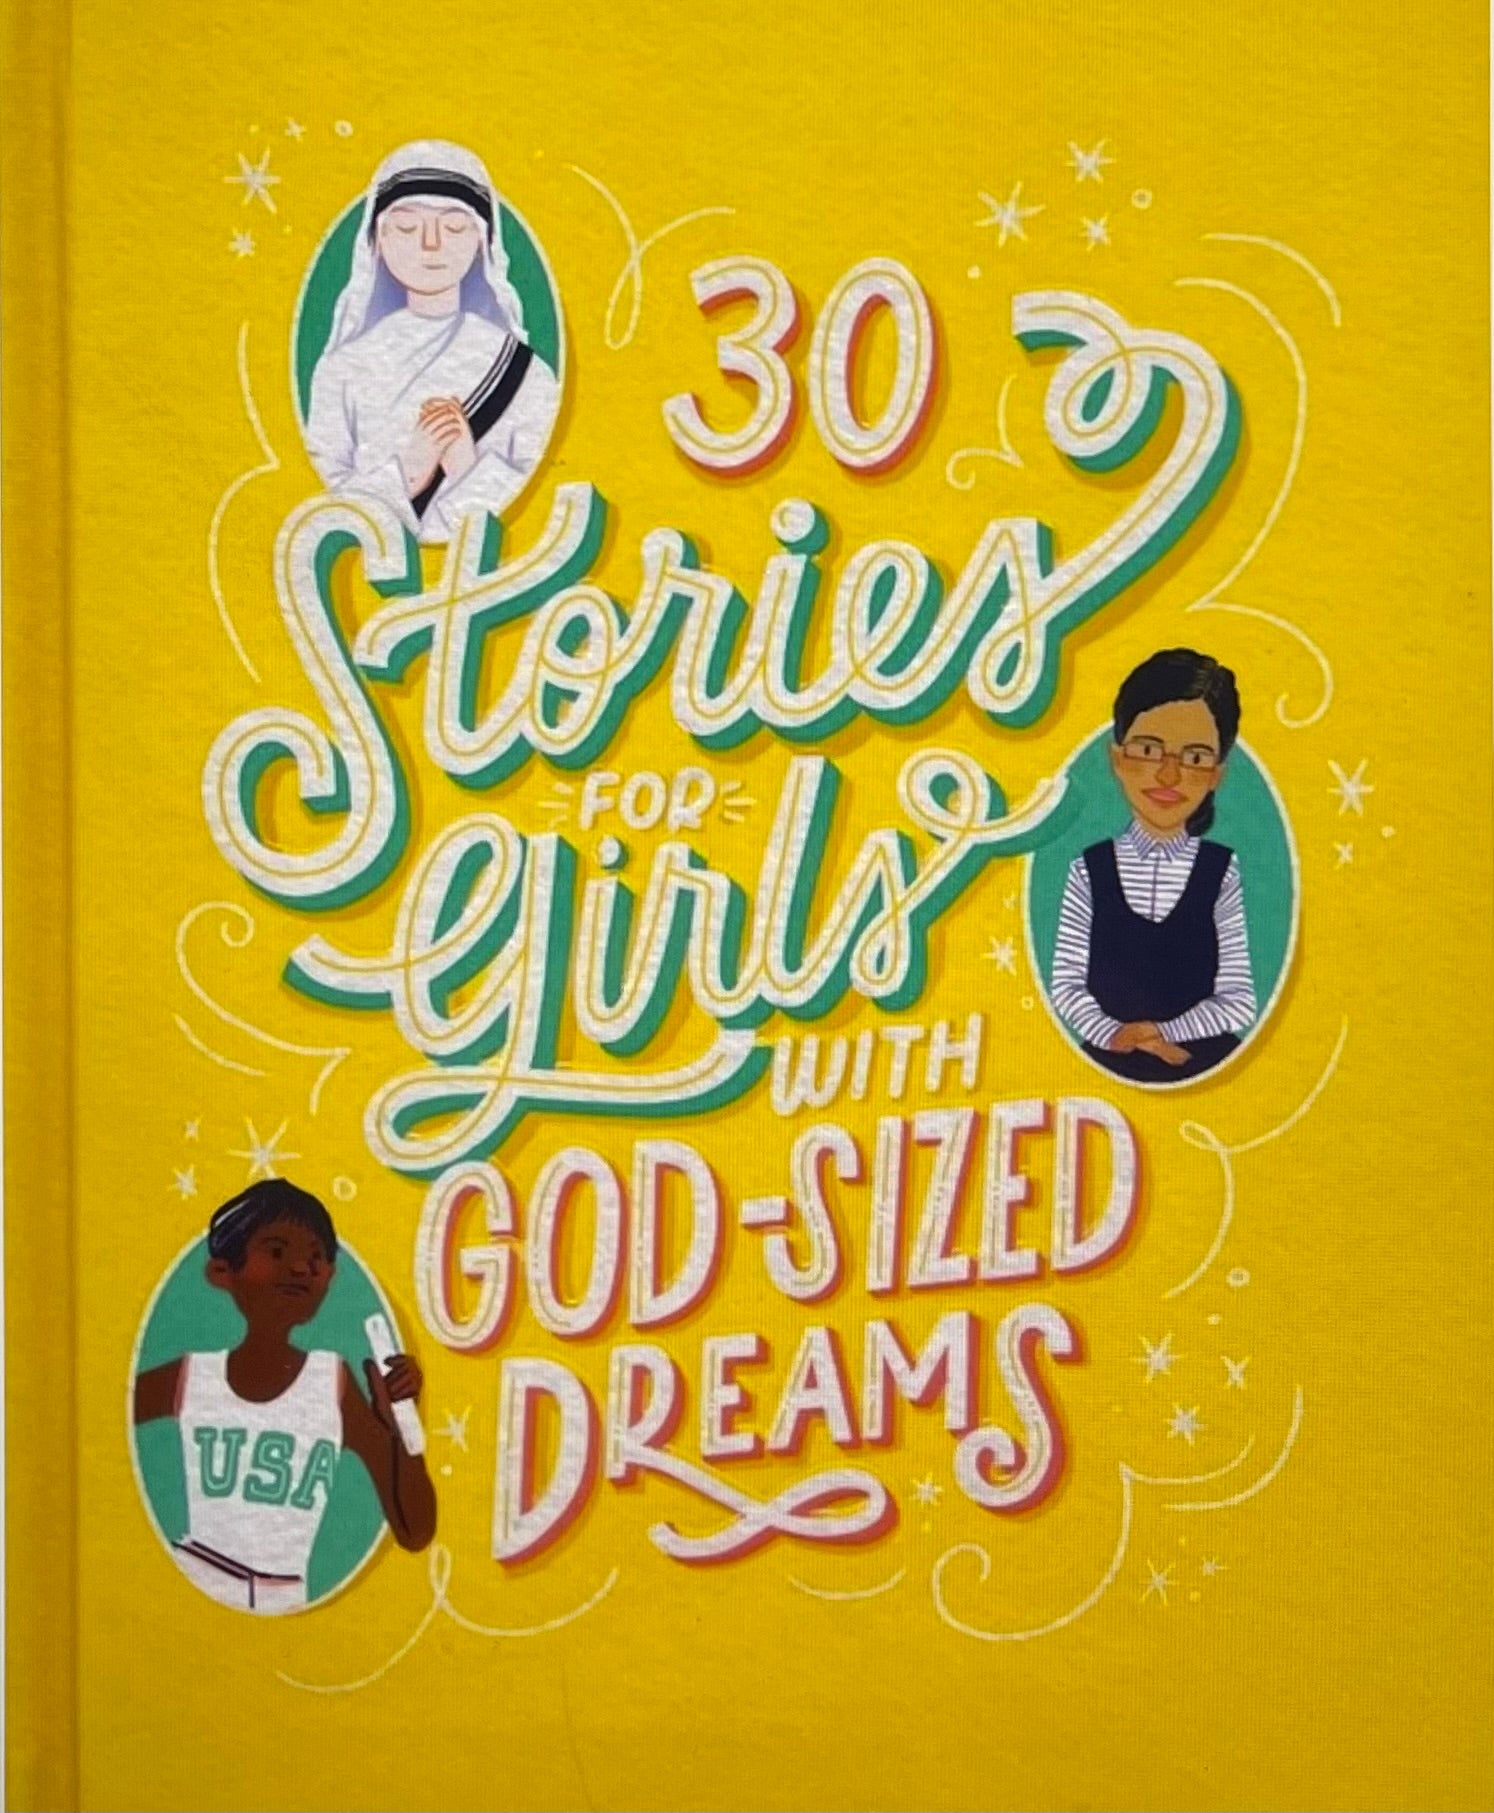 30 Stories for Girls with God-Sized Dreams